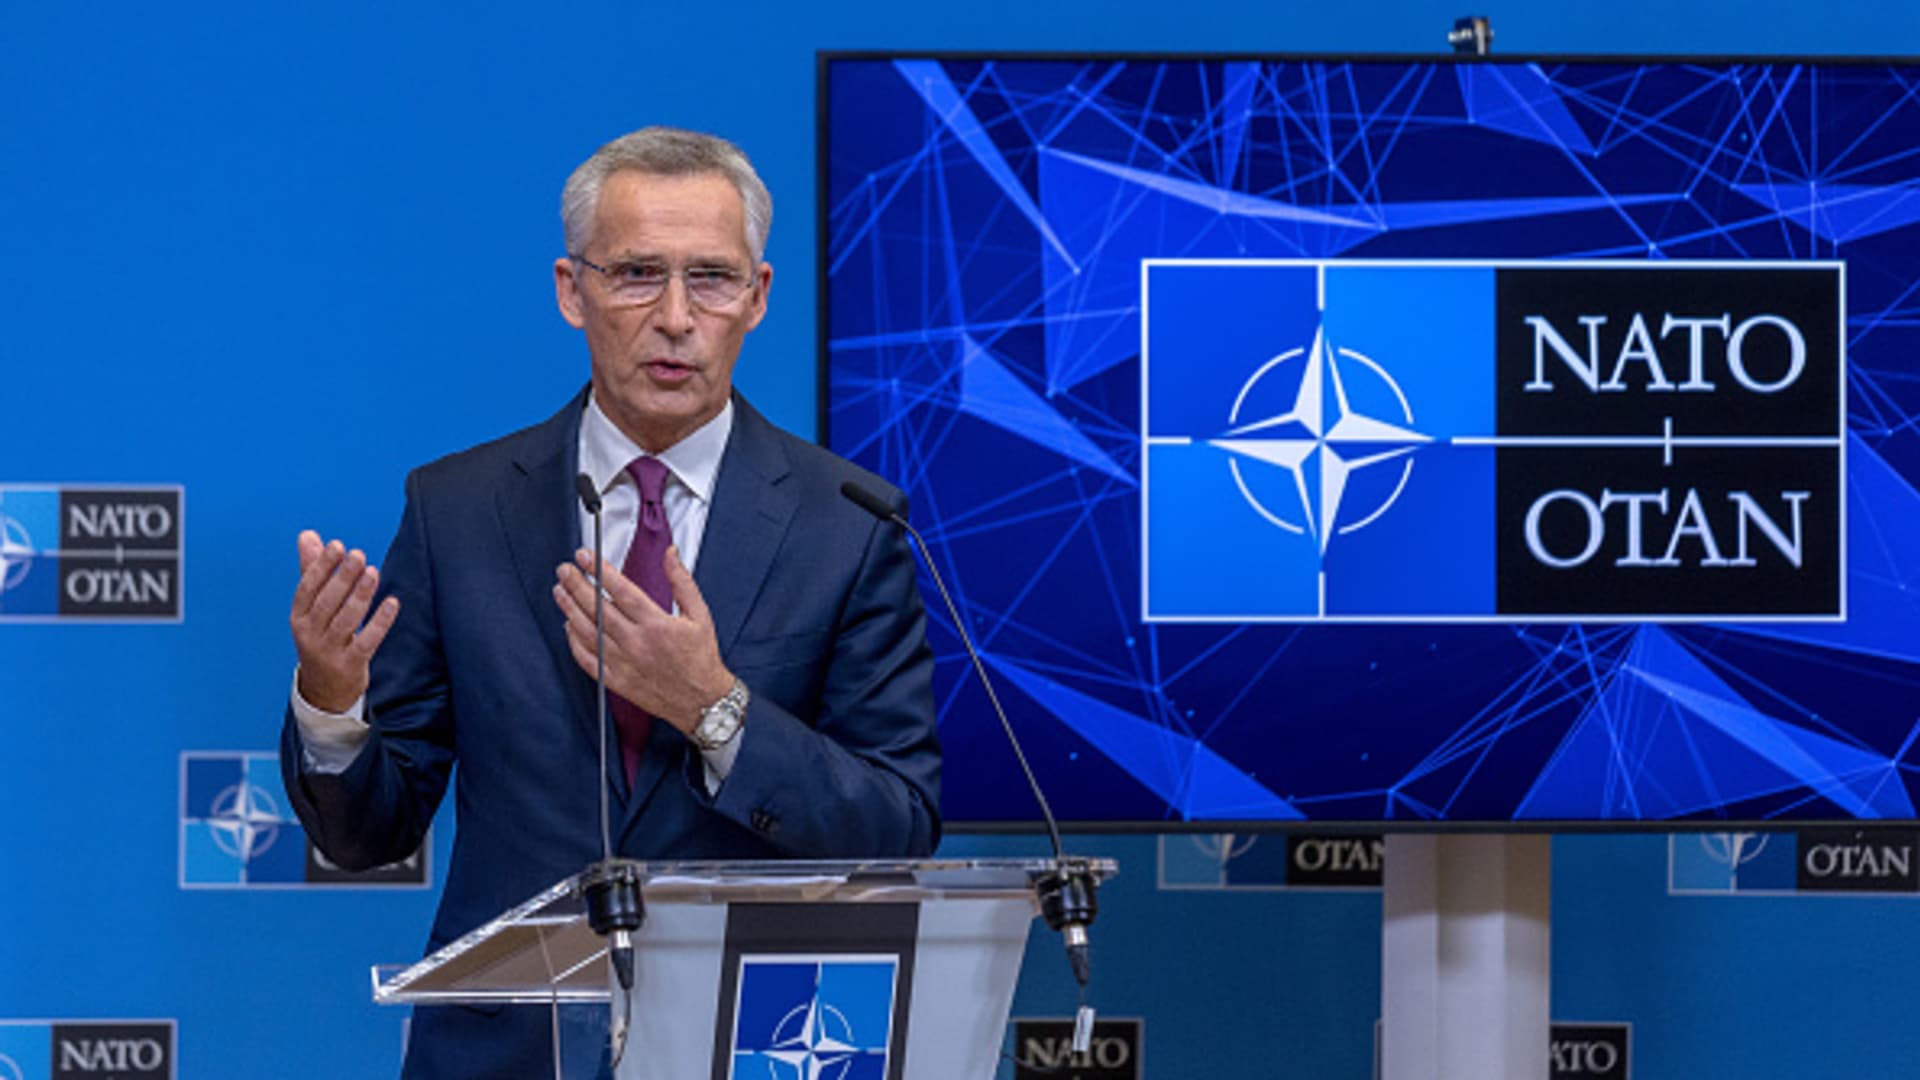 NATO Secretary General Jens Stoltenberg holds a closing press conference during the second of two days of defence ministers' meetings at NATO headquarters on October 13, 2022 in Brussels, Belgium.